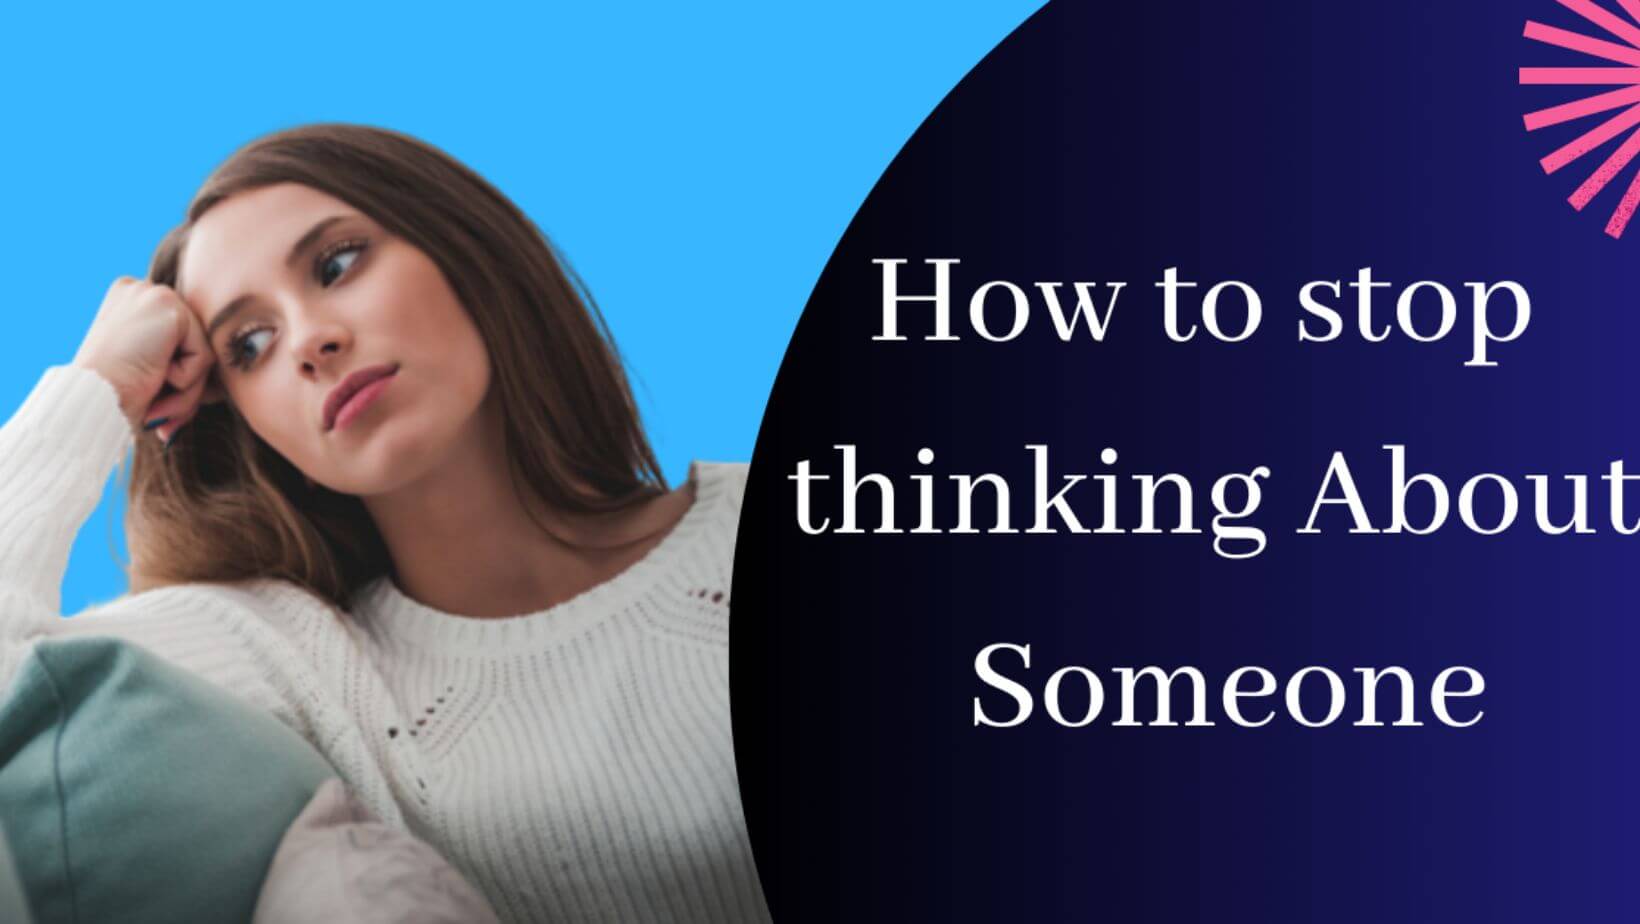 How To Stop Thinking About Someone